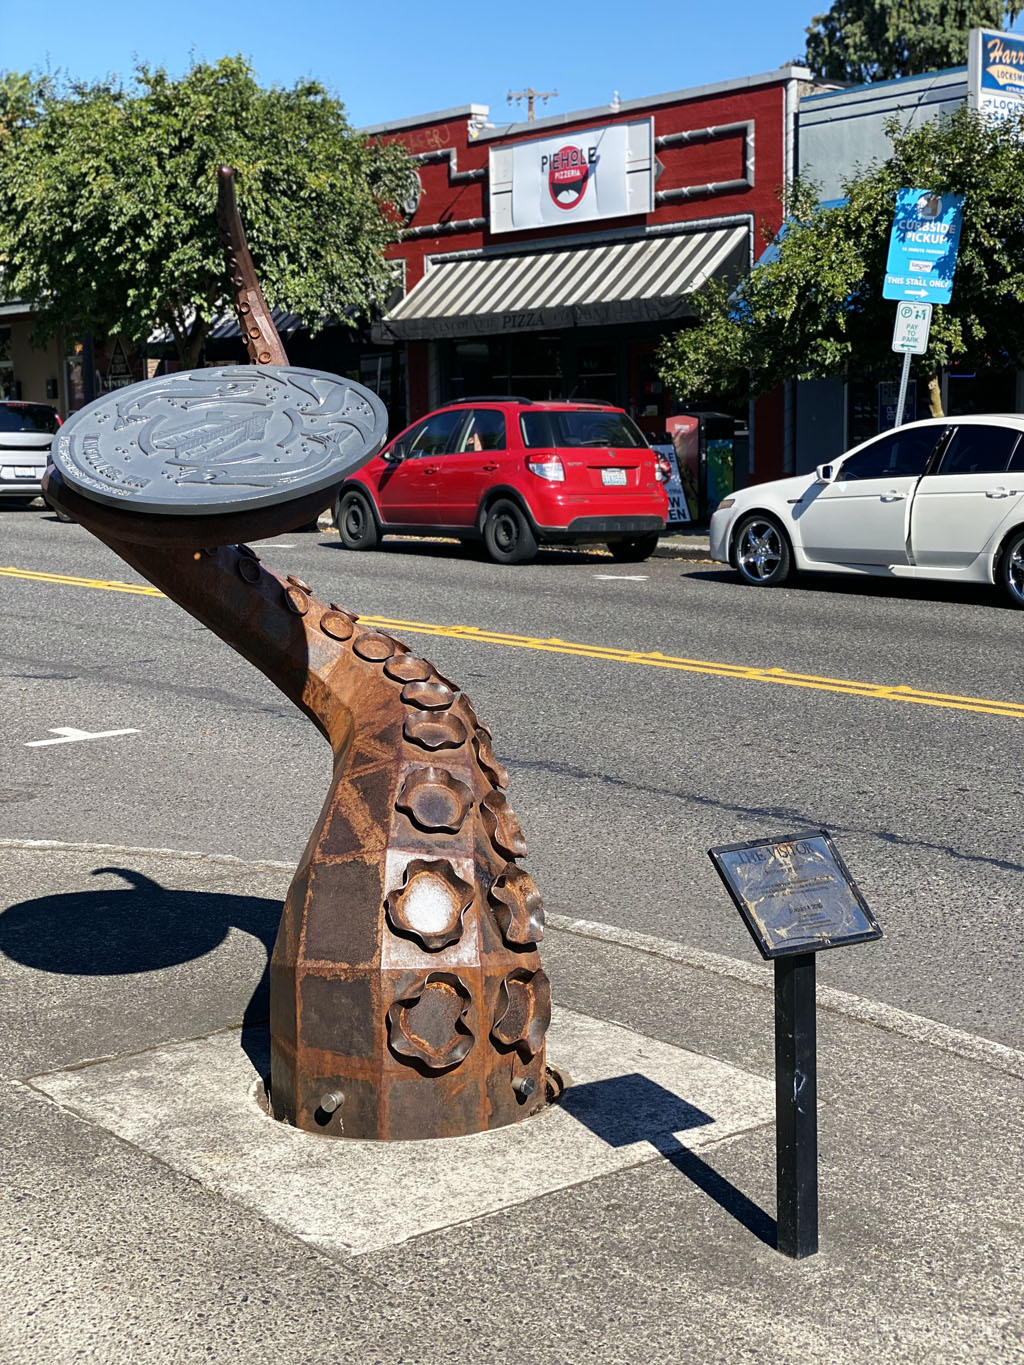 octopus sculpture in Vancouver made to look like it's coming out of the sewer